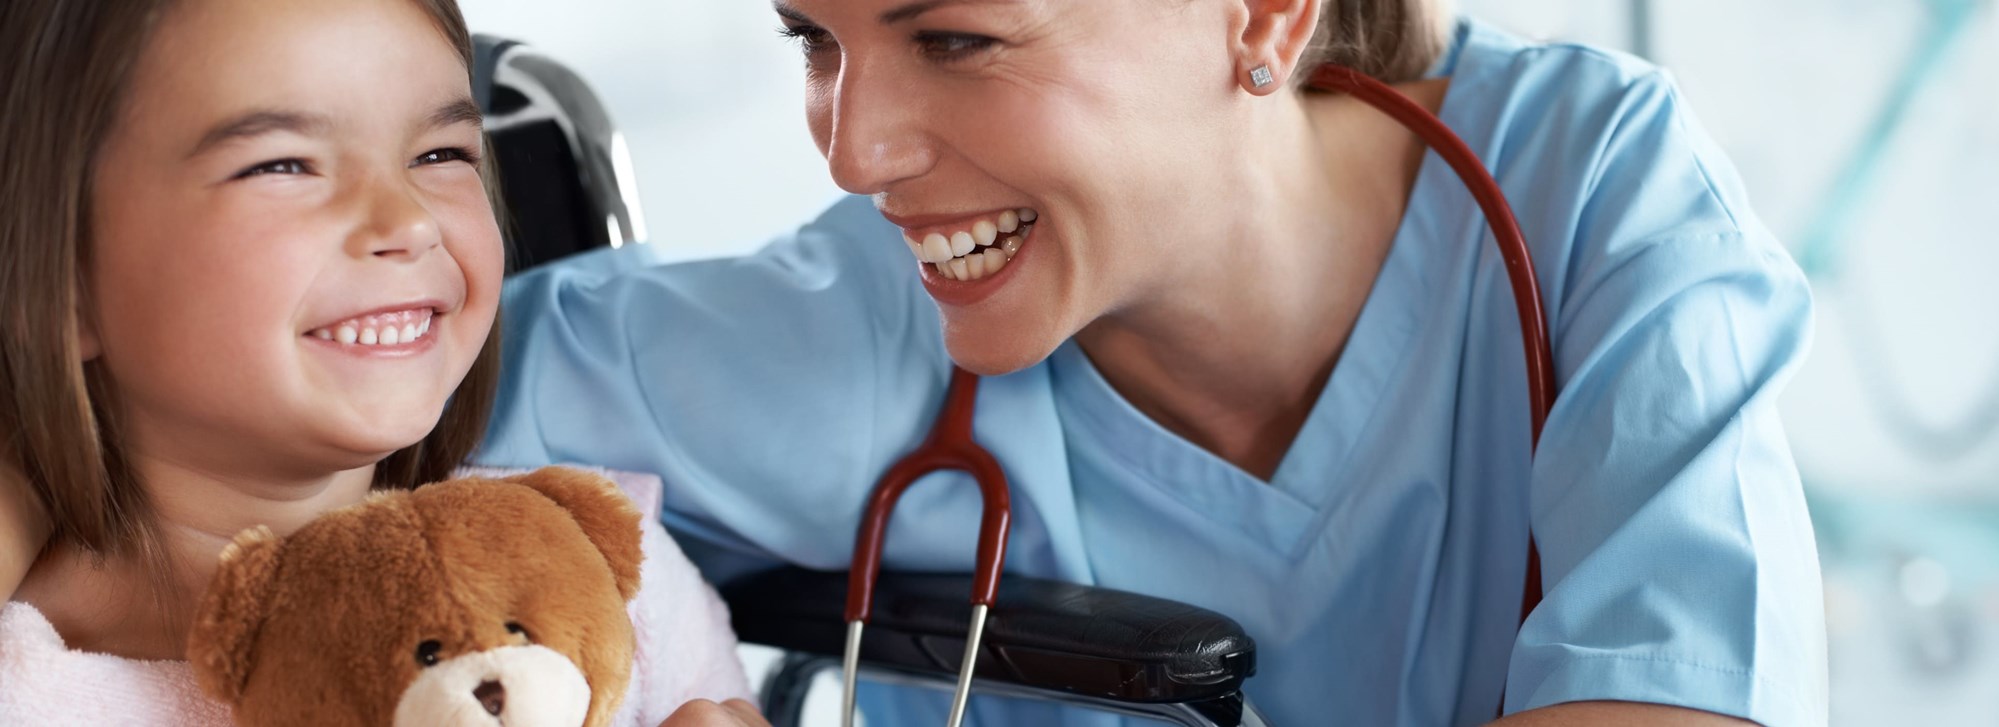 smiling child holding a teddy bear laughing with her doctor